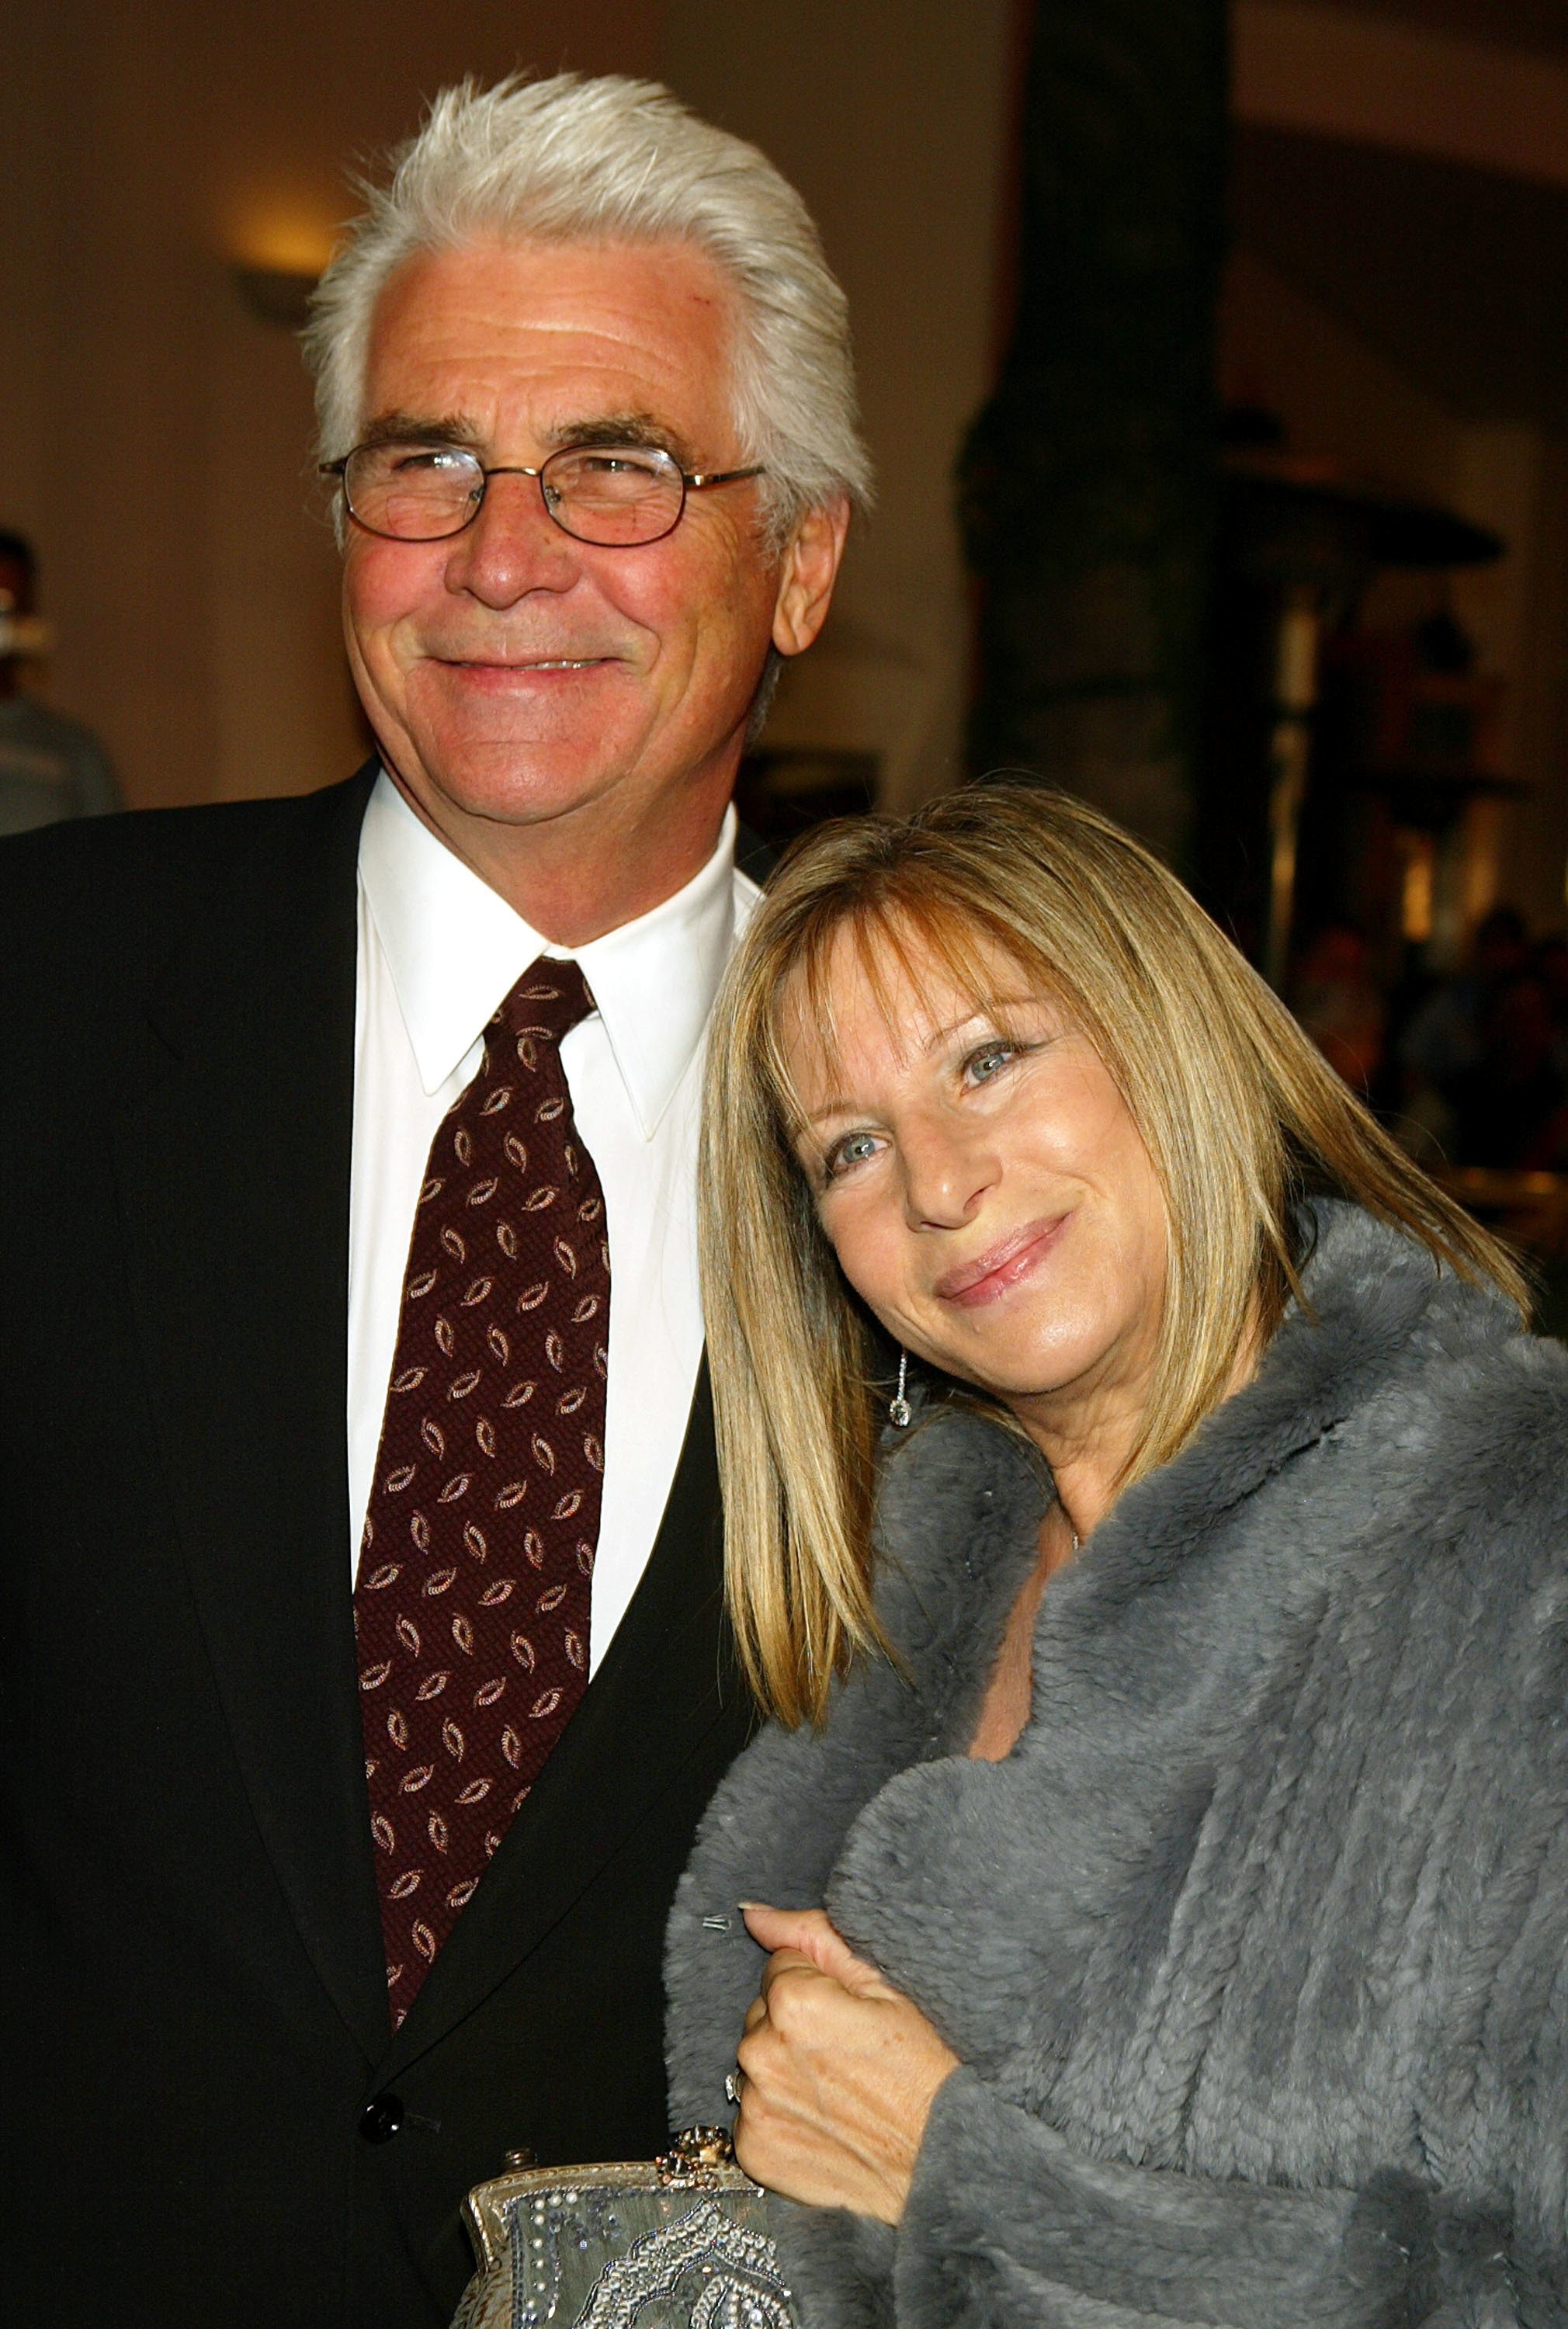 Barbra Streisand and husband James Brolin at the premiere of Universal's "Meet the Fockers" at the Universal Amphitheatre on December 16. 2004 in Los Angeles, California. | Photo: Getty Images